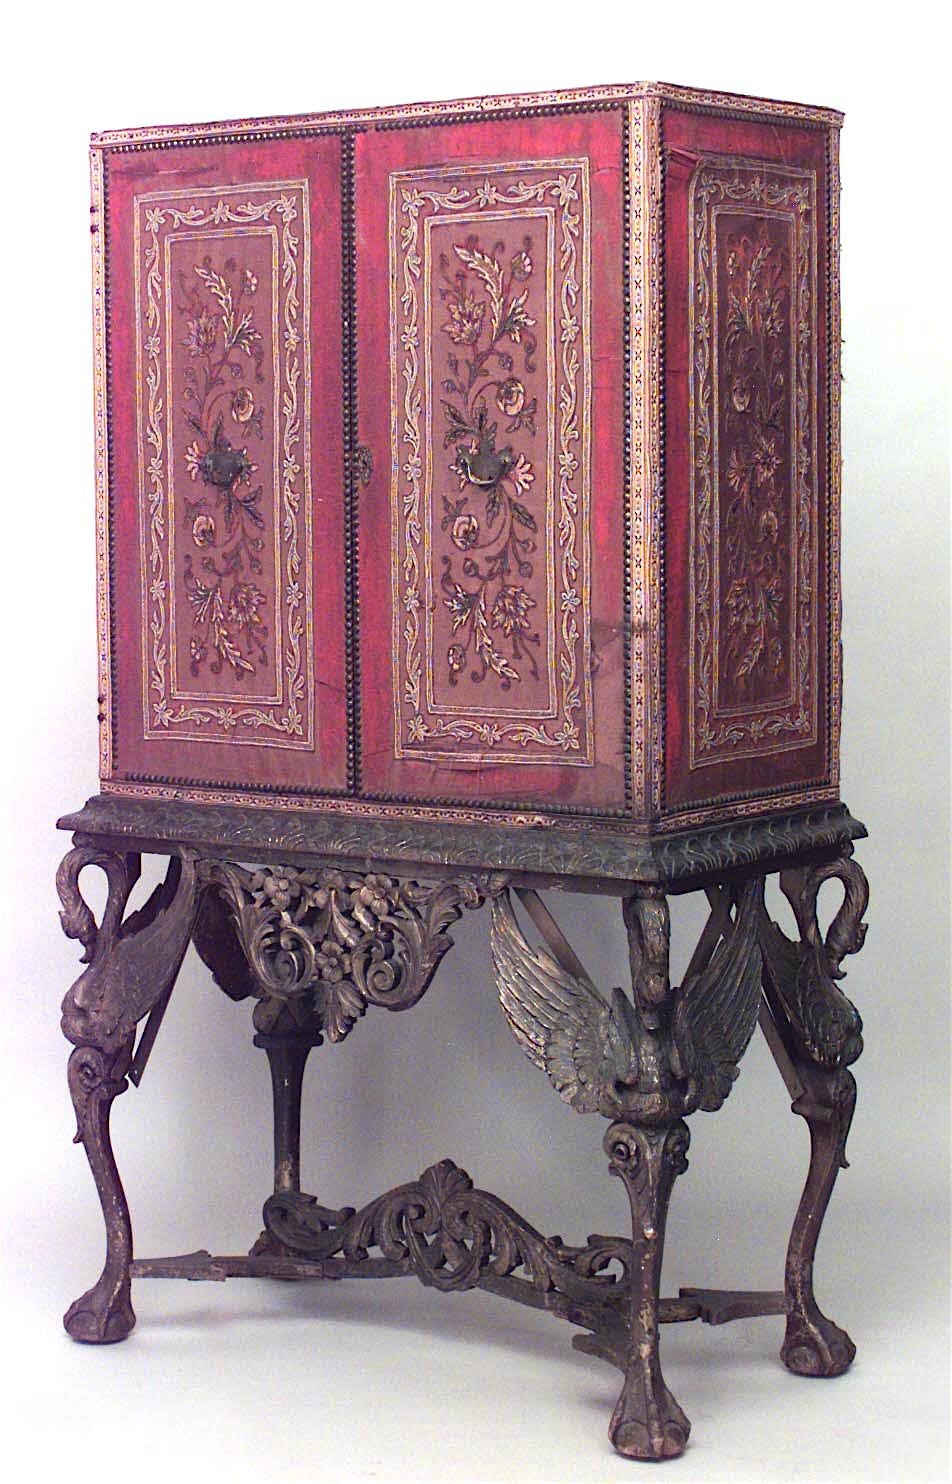 Spanish Renaissance style (19/20th Century) cabinet on stand with a Pair of gold thread embroidered red silk upholstered doors on a giltwood base with swan monopodia legs.
